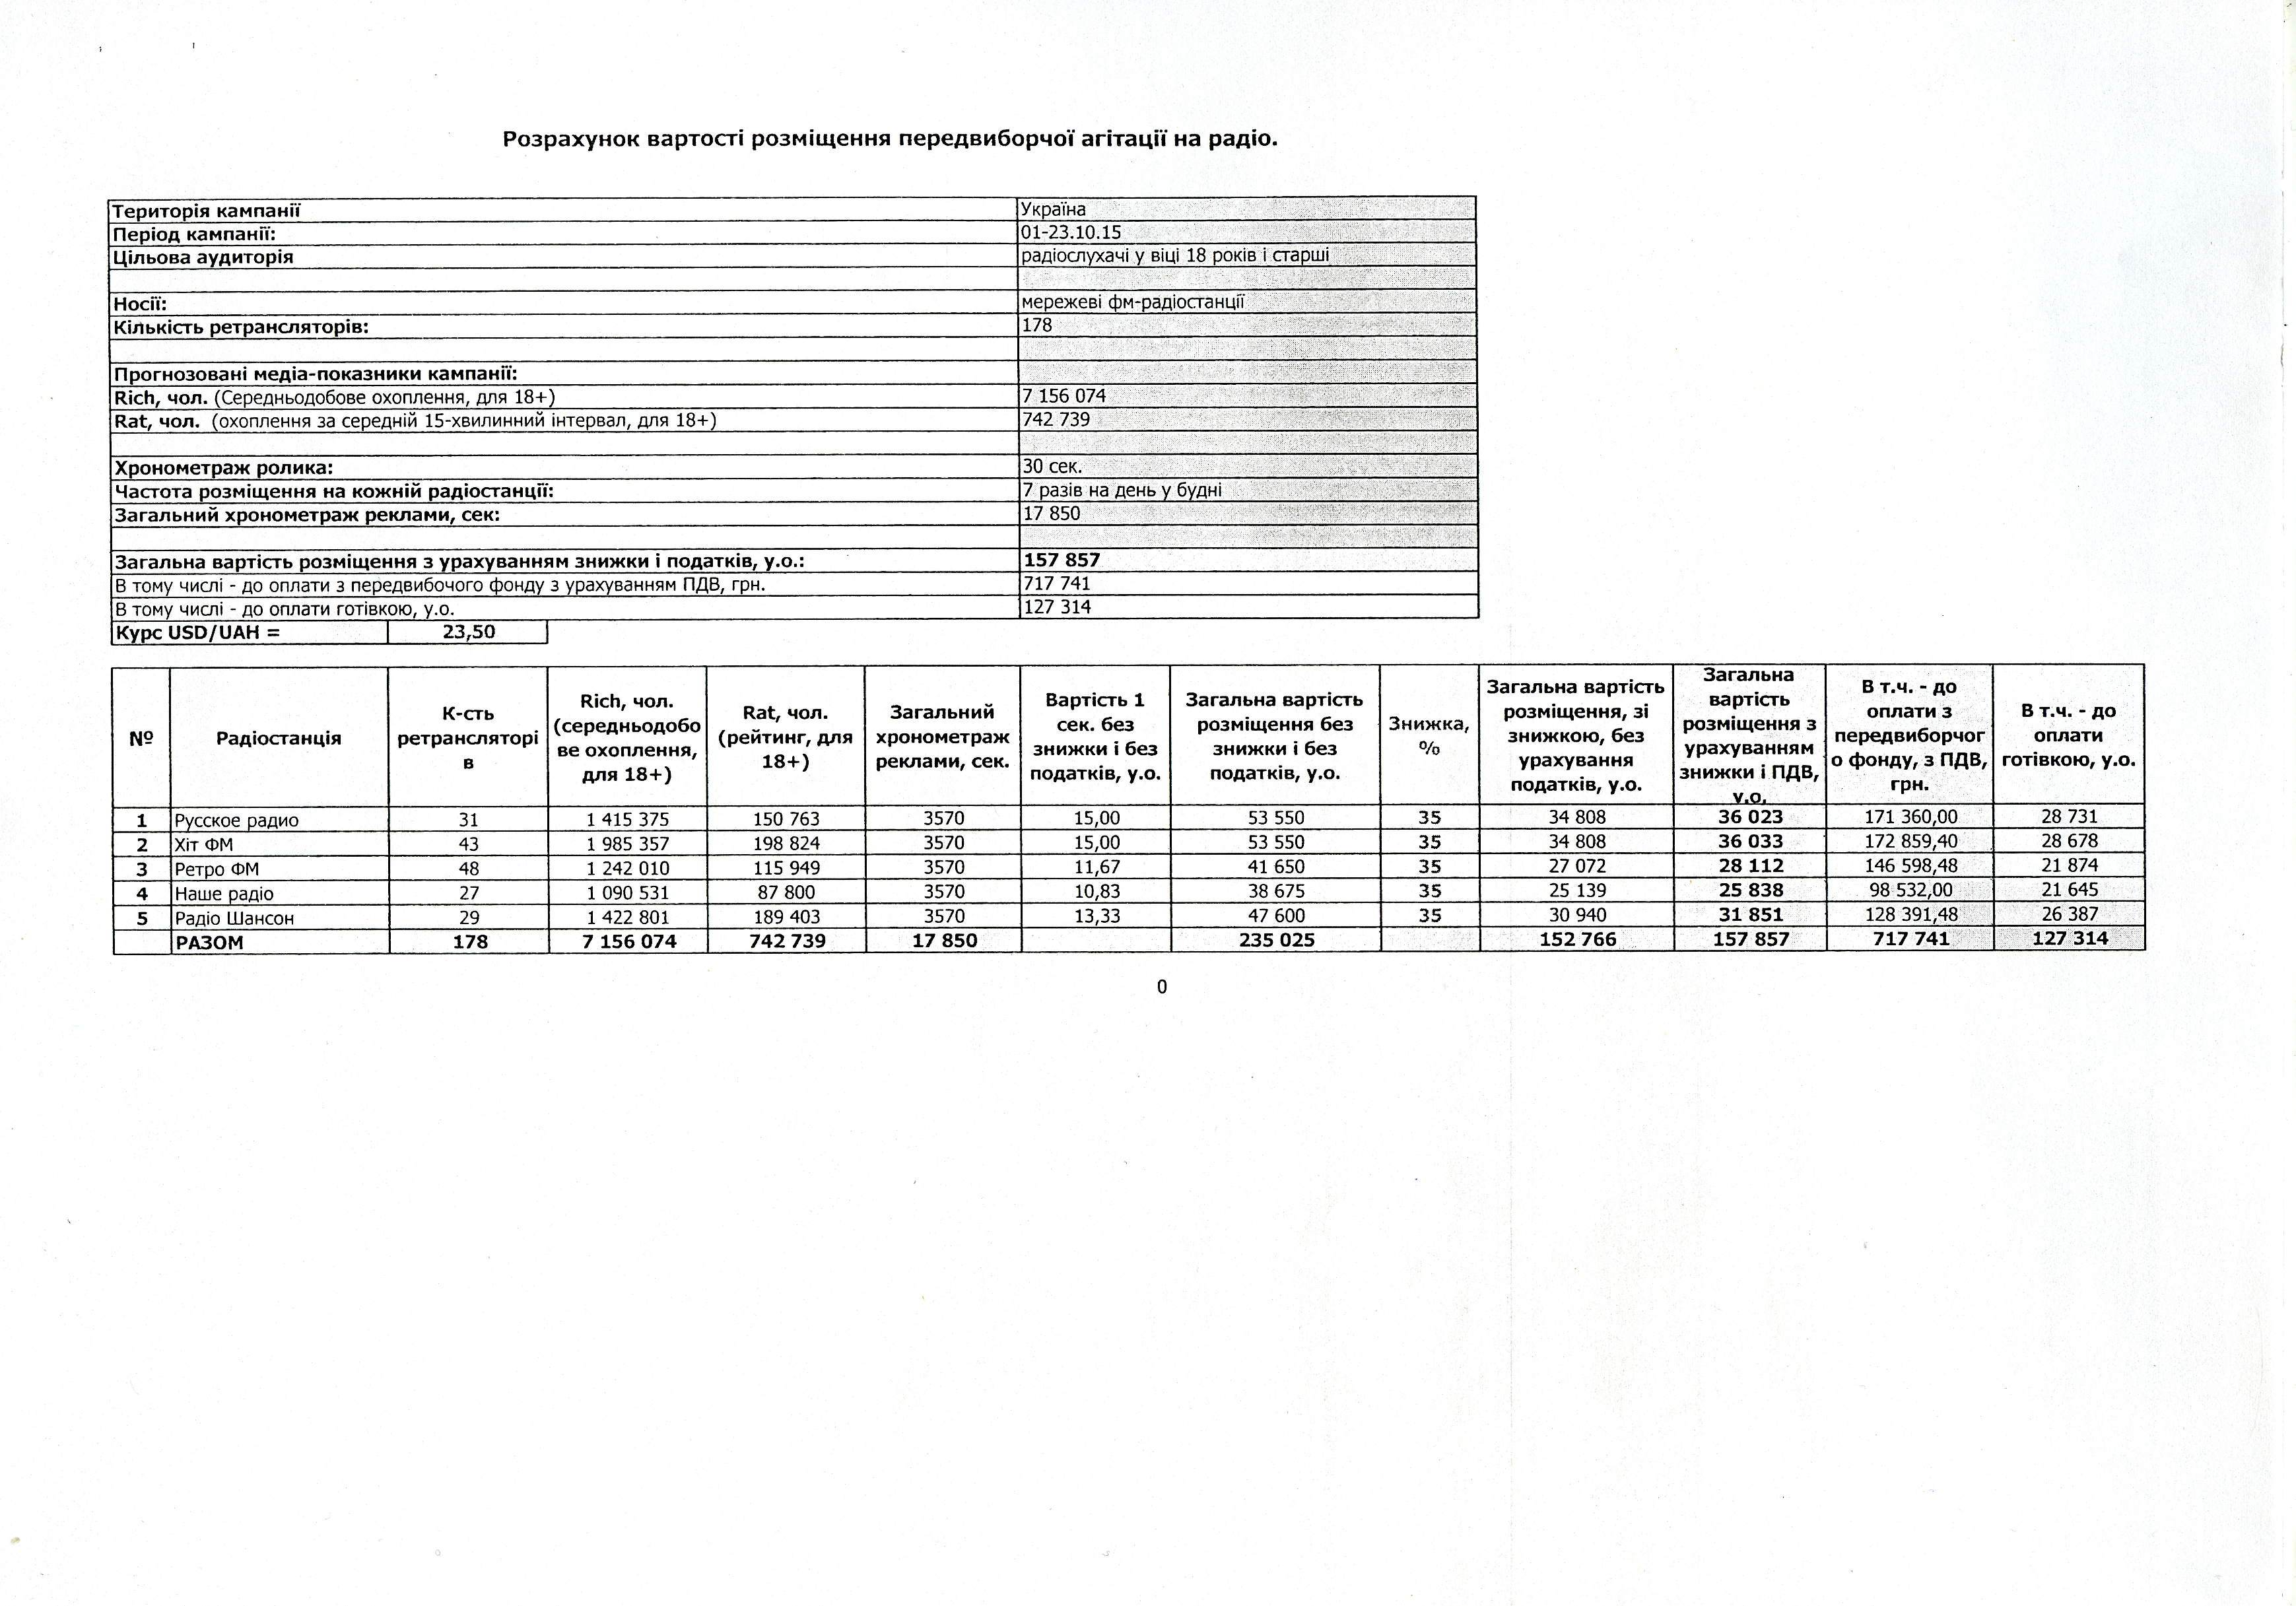 This document, obtained by the Kyiv Post, allegedly lists the sums paid to popular radio stations for political ads in the midst of the 2015 local elections.